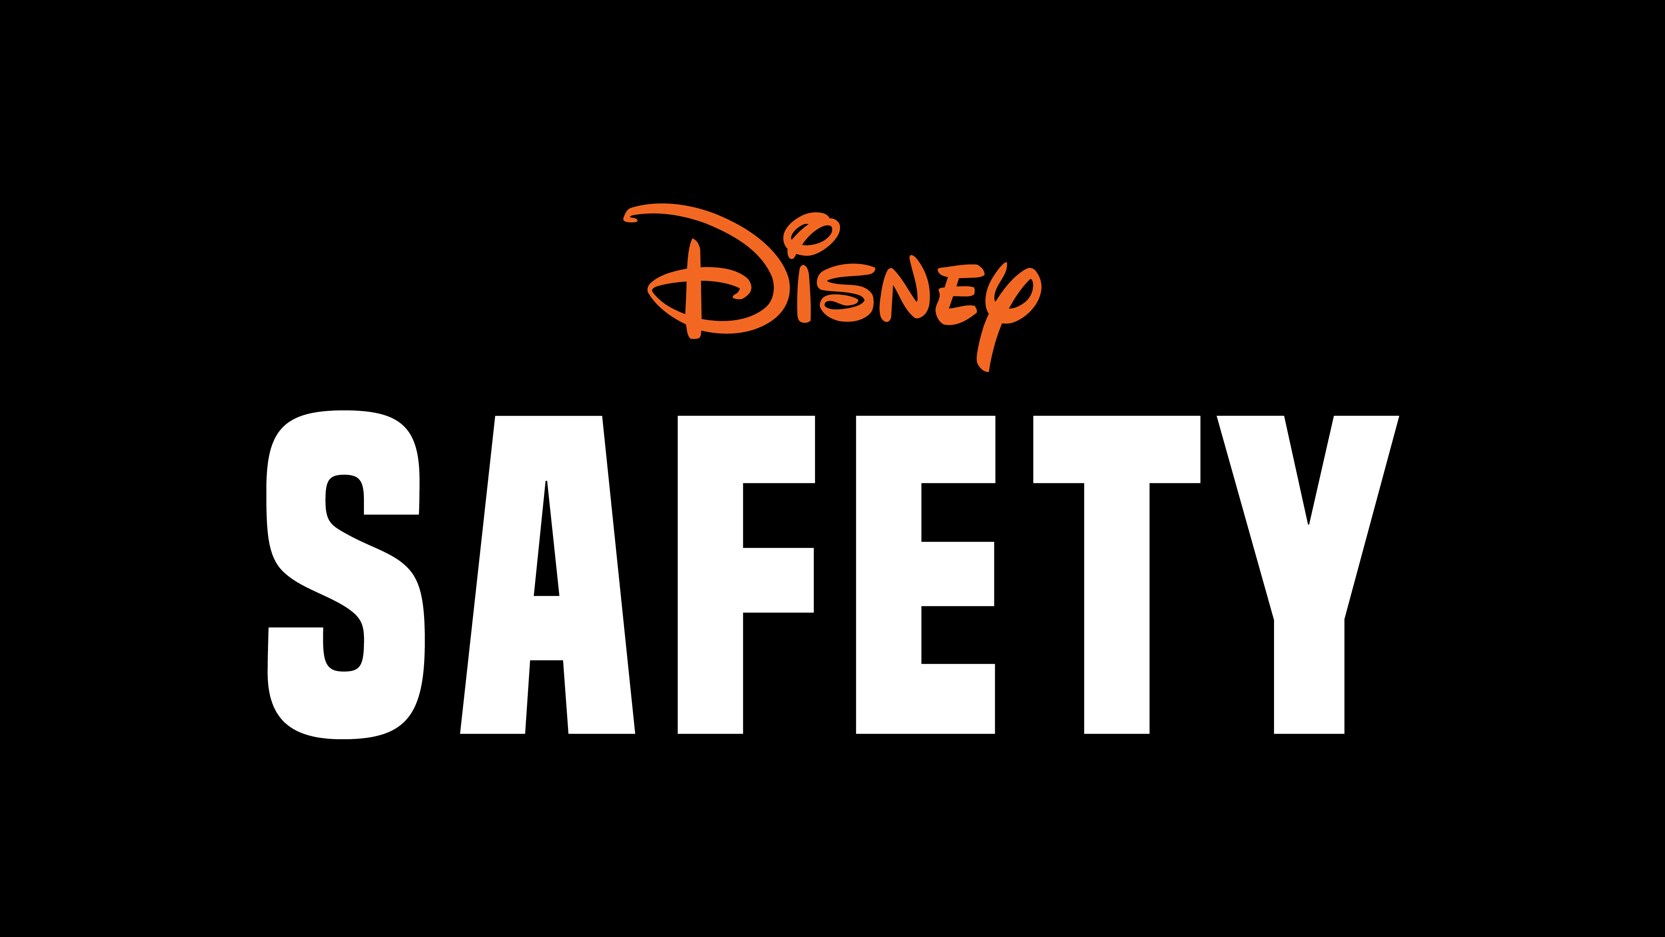 Disney’s powerful and moving drama “Safety” to debut on Disney+ on the 11th December